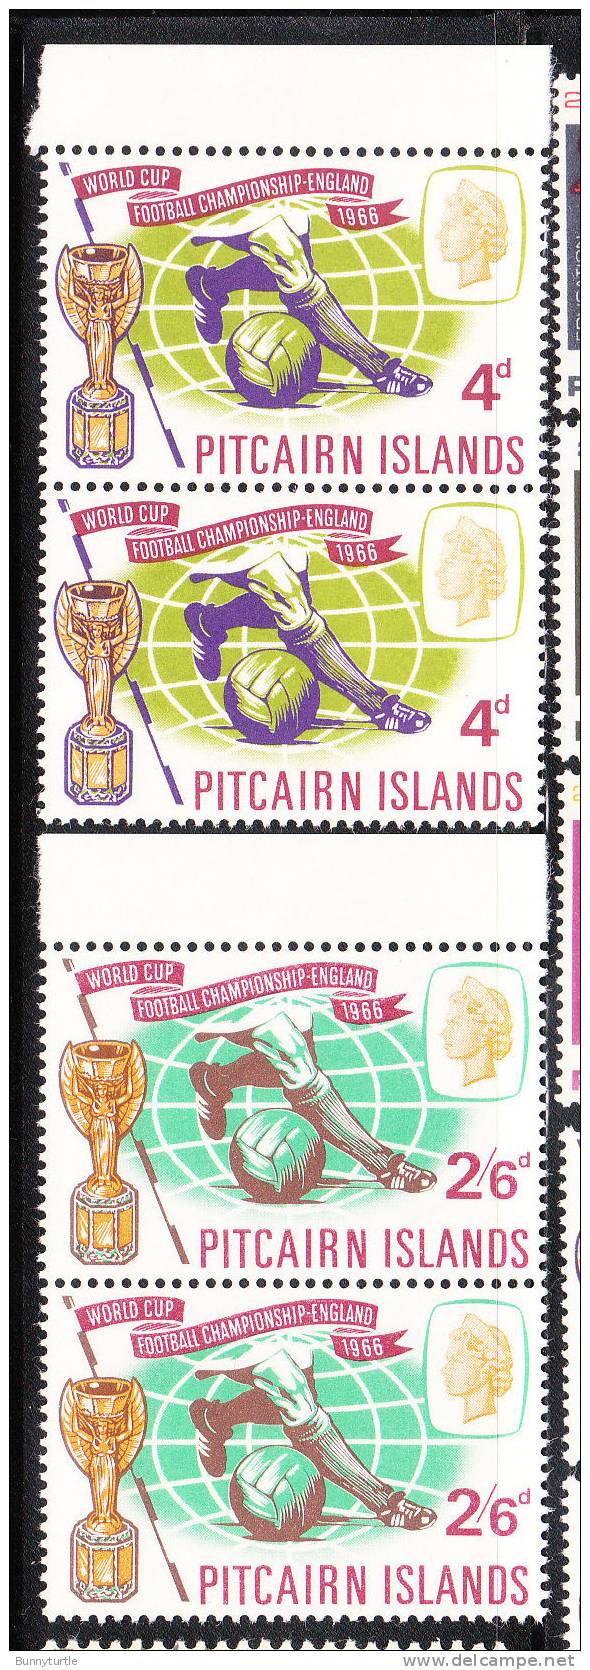 Pitcairn Islands 1966 World Cup Soccer Issue Omnibus Blk Of 2 MNH - Pitcairn